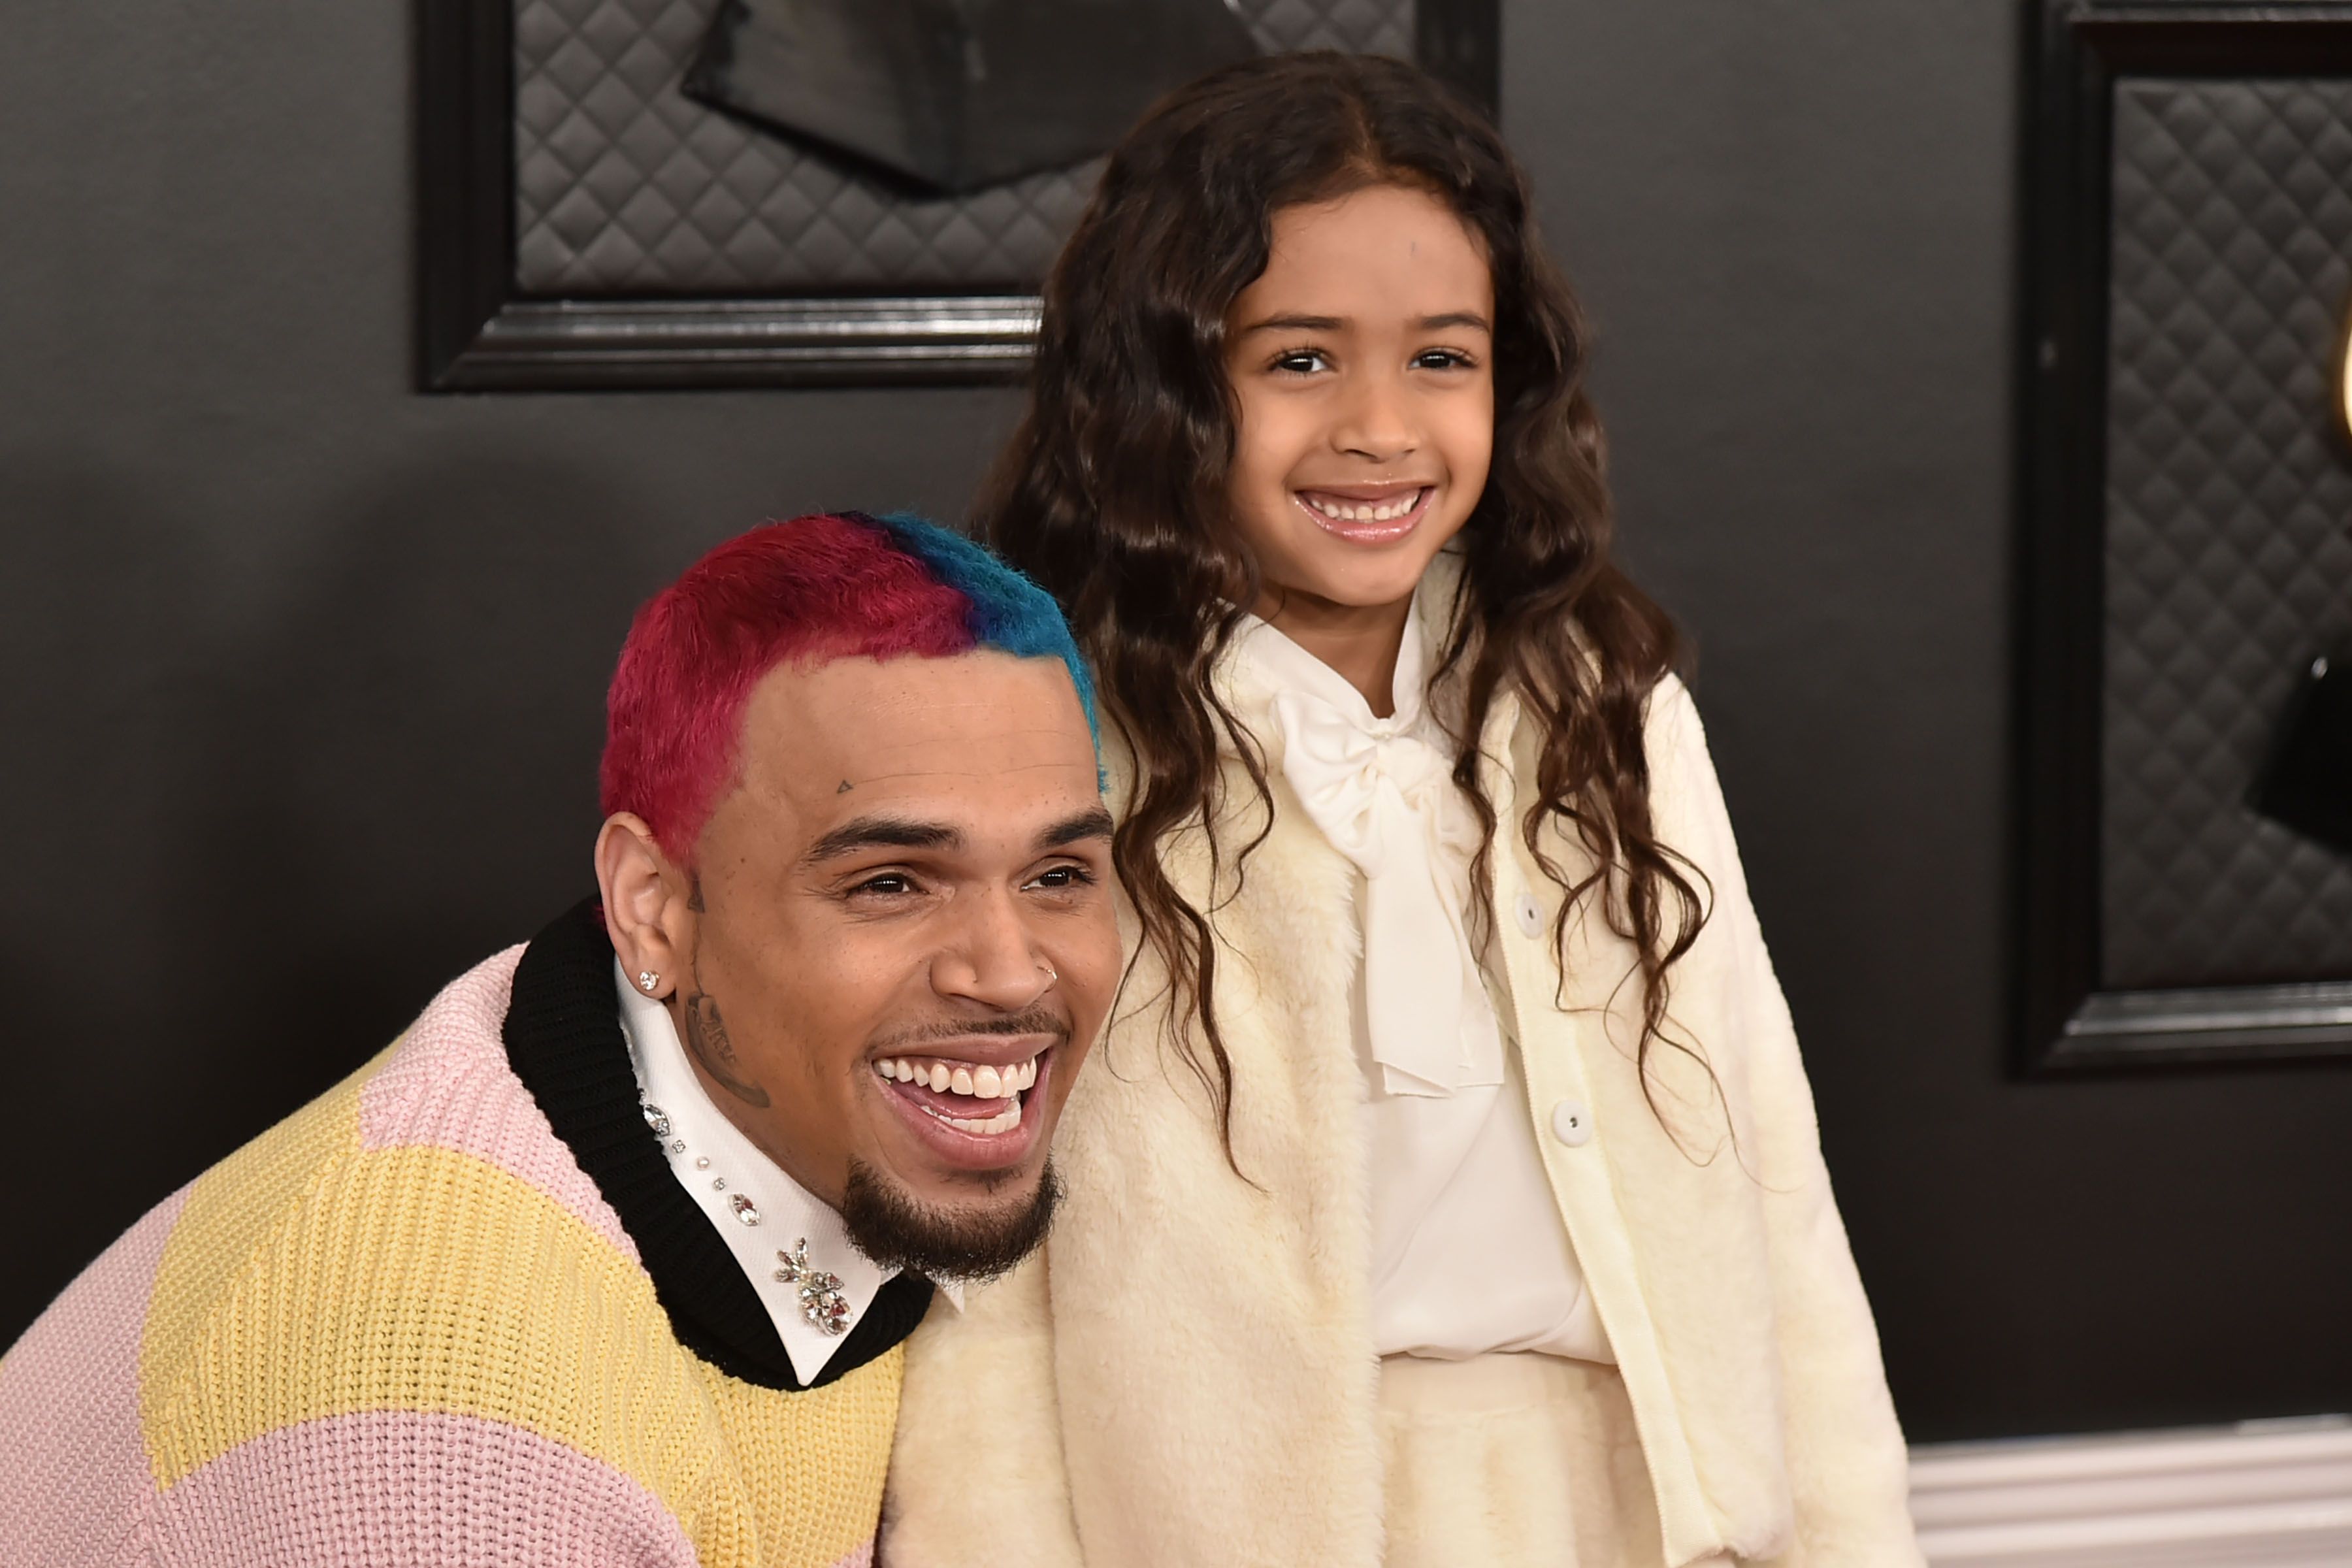 Chris Brown and Royalty Brown at the 62nd Annual Grammy Awards at Staples Center on January 26, 2020 | Photo: Getty Images